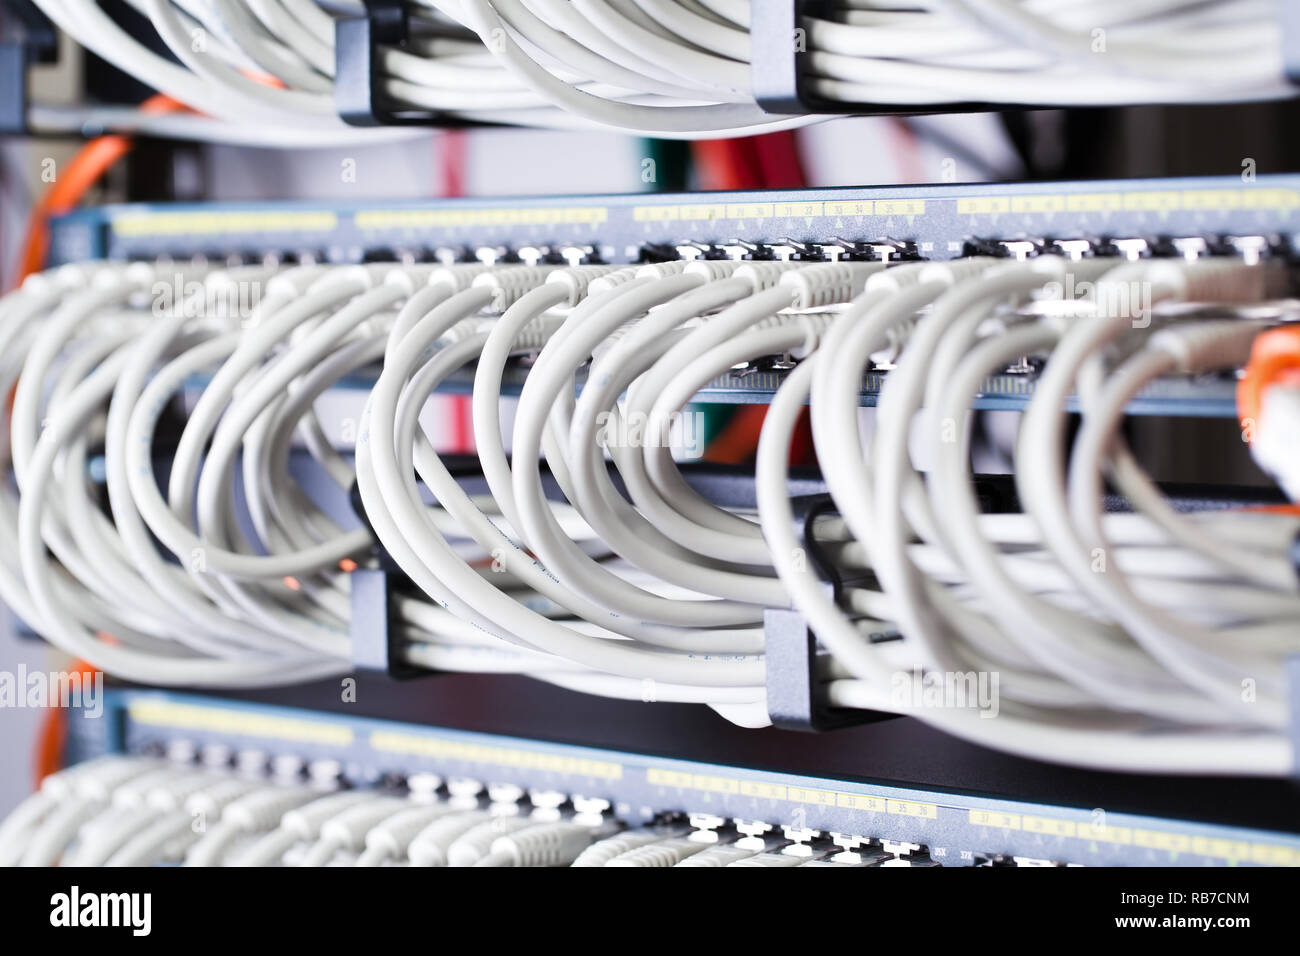 Gigabit network switch and perfect aligned patch cables in datacenter Stock Photo